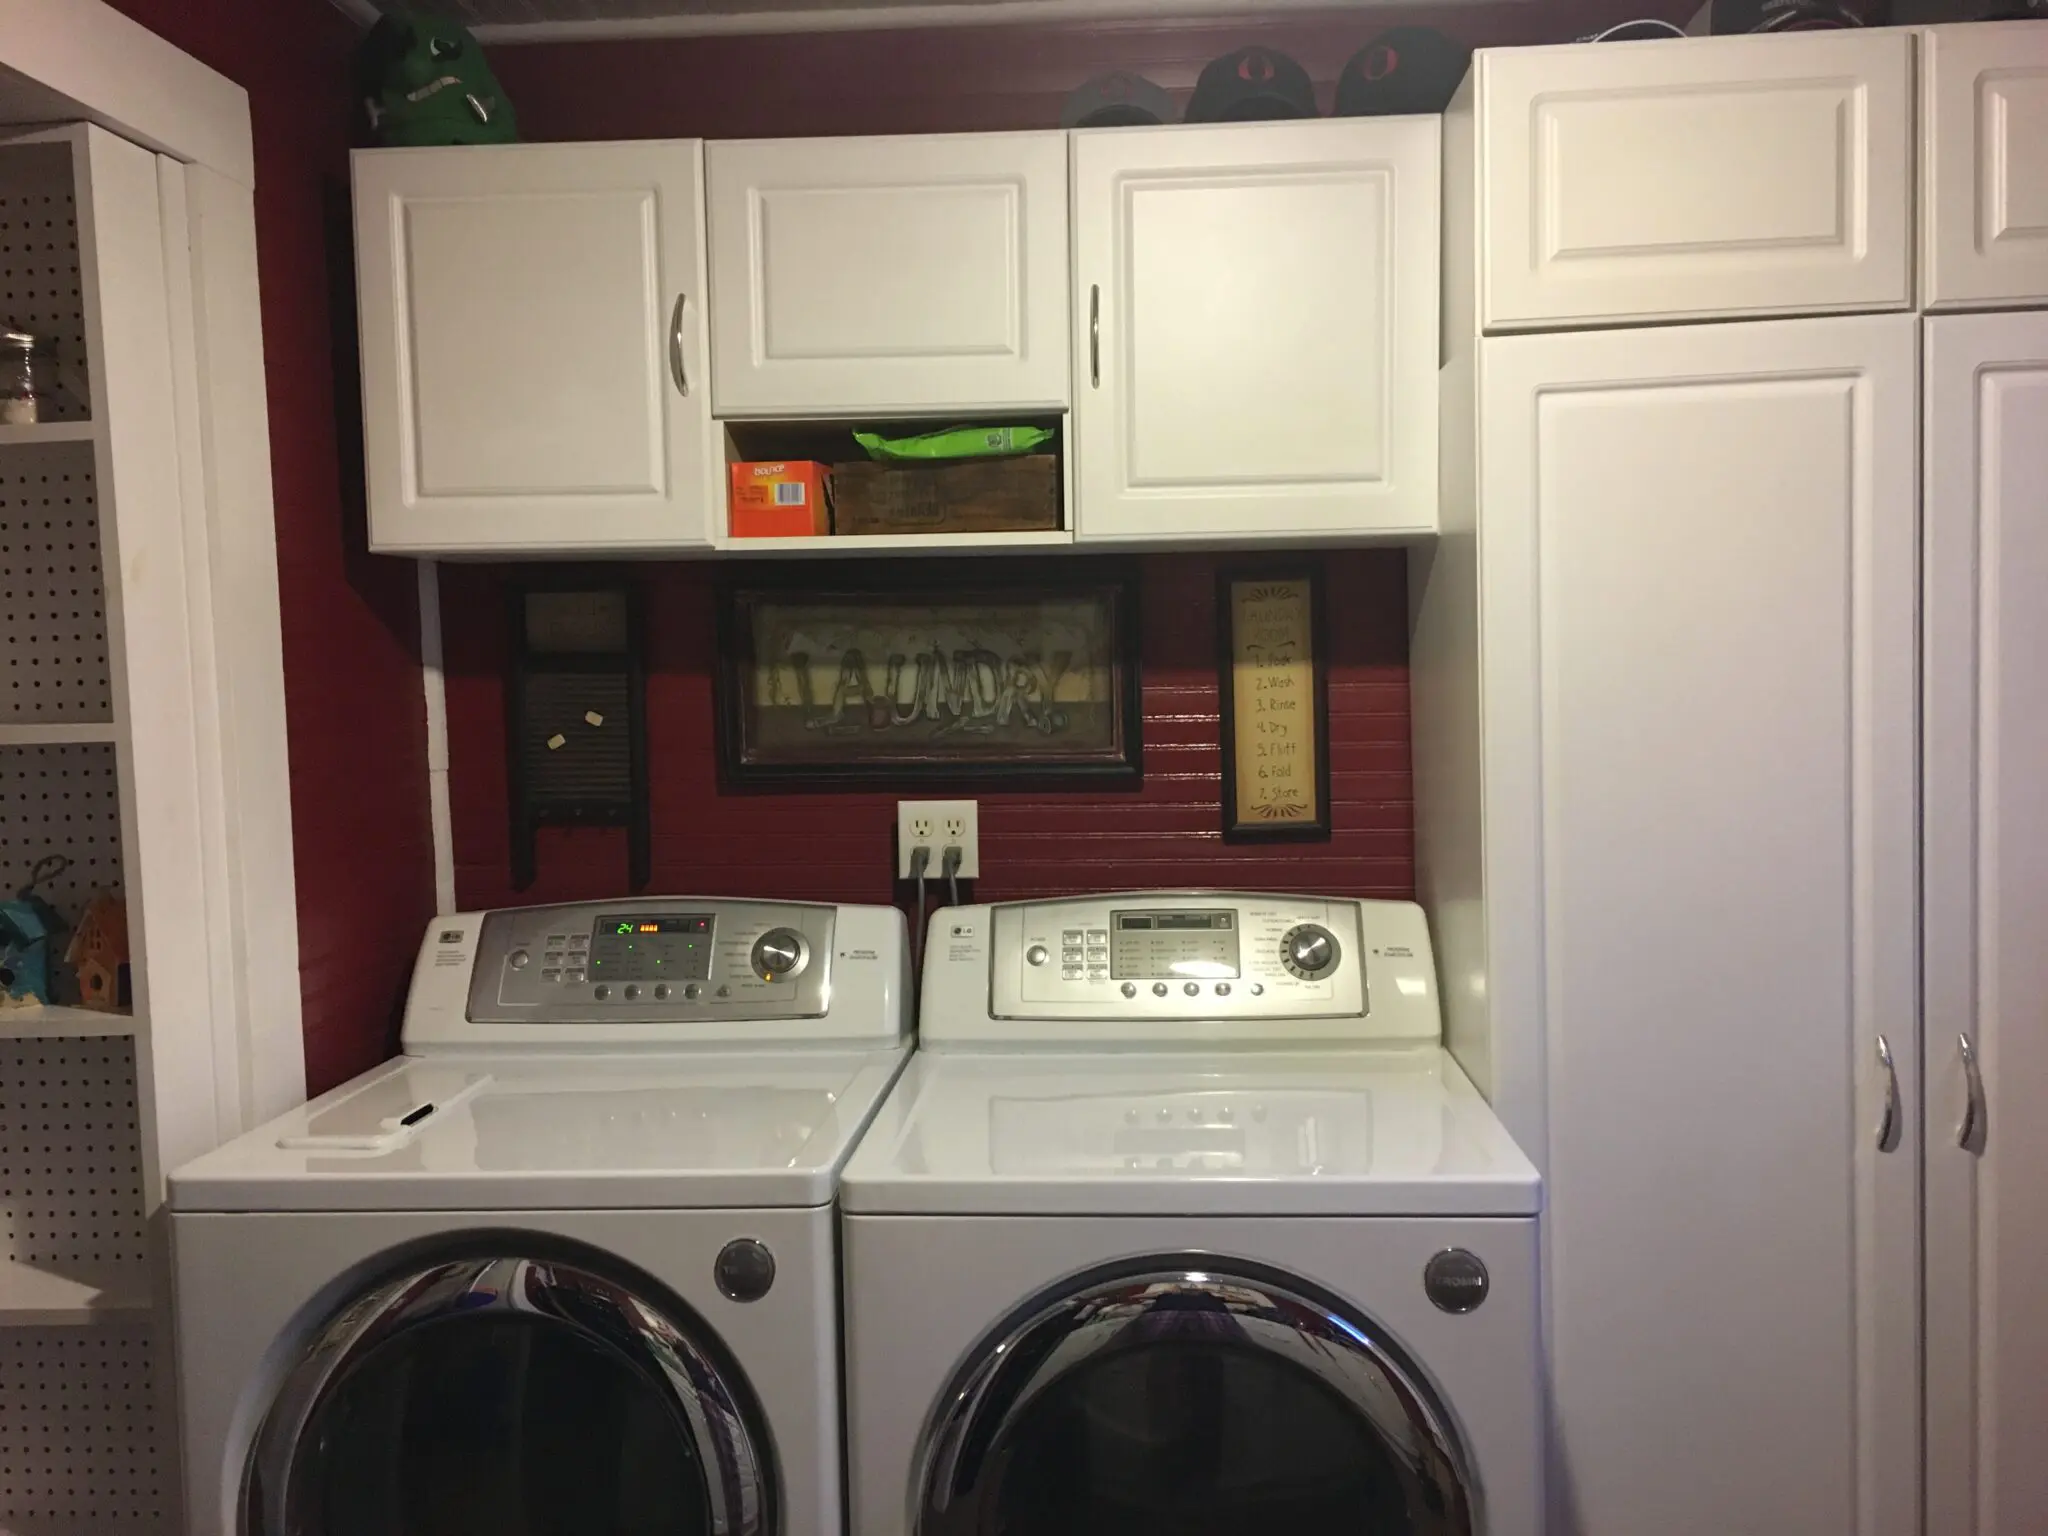 The laundry room with stacked washing machine and dryer